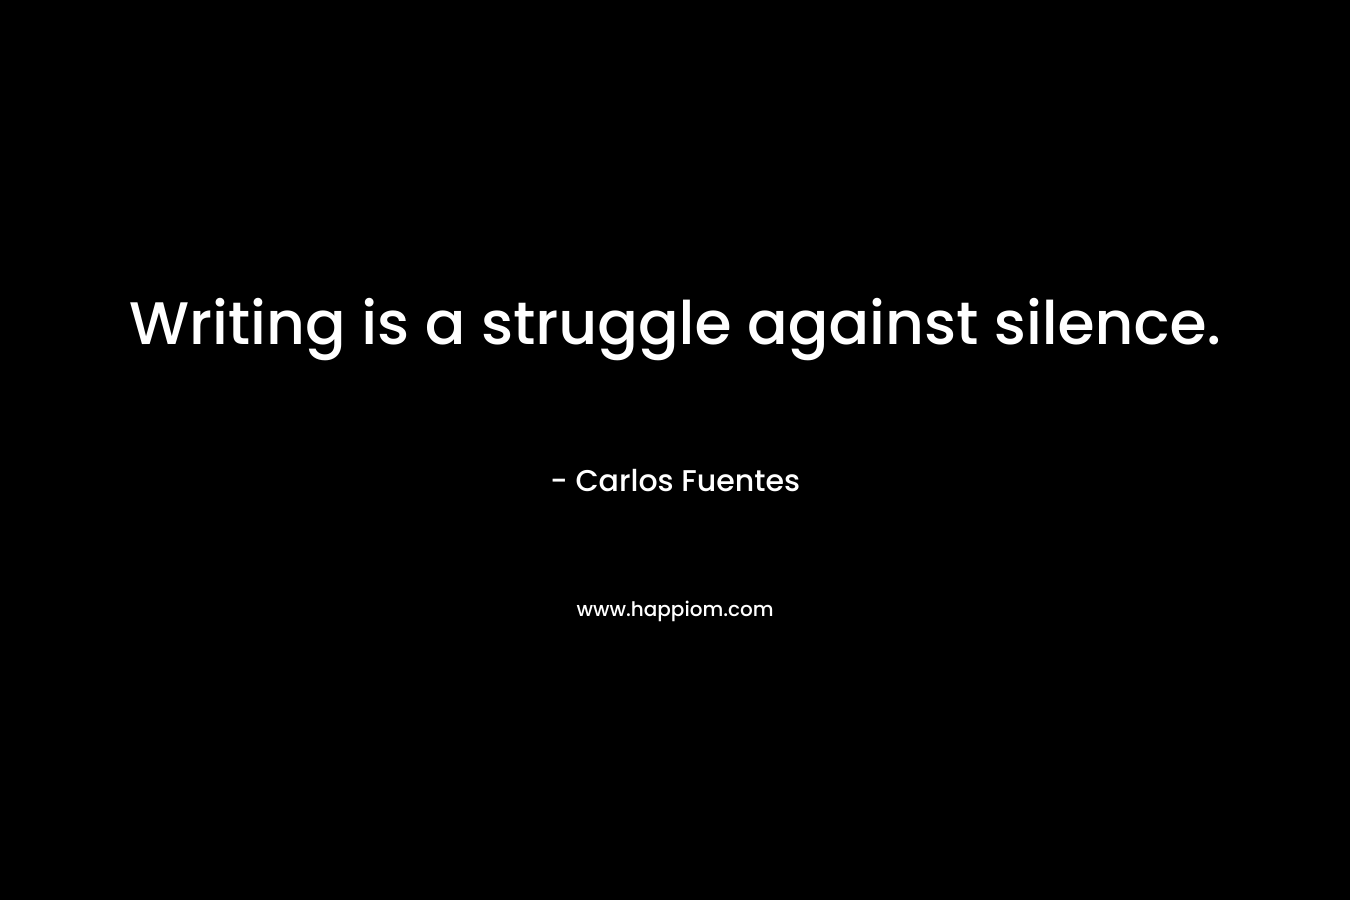 Writing is a struggle against silence. – Carlos Fuentes